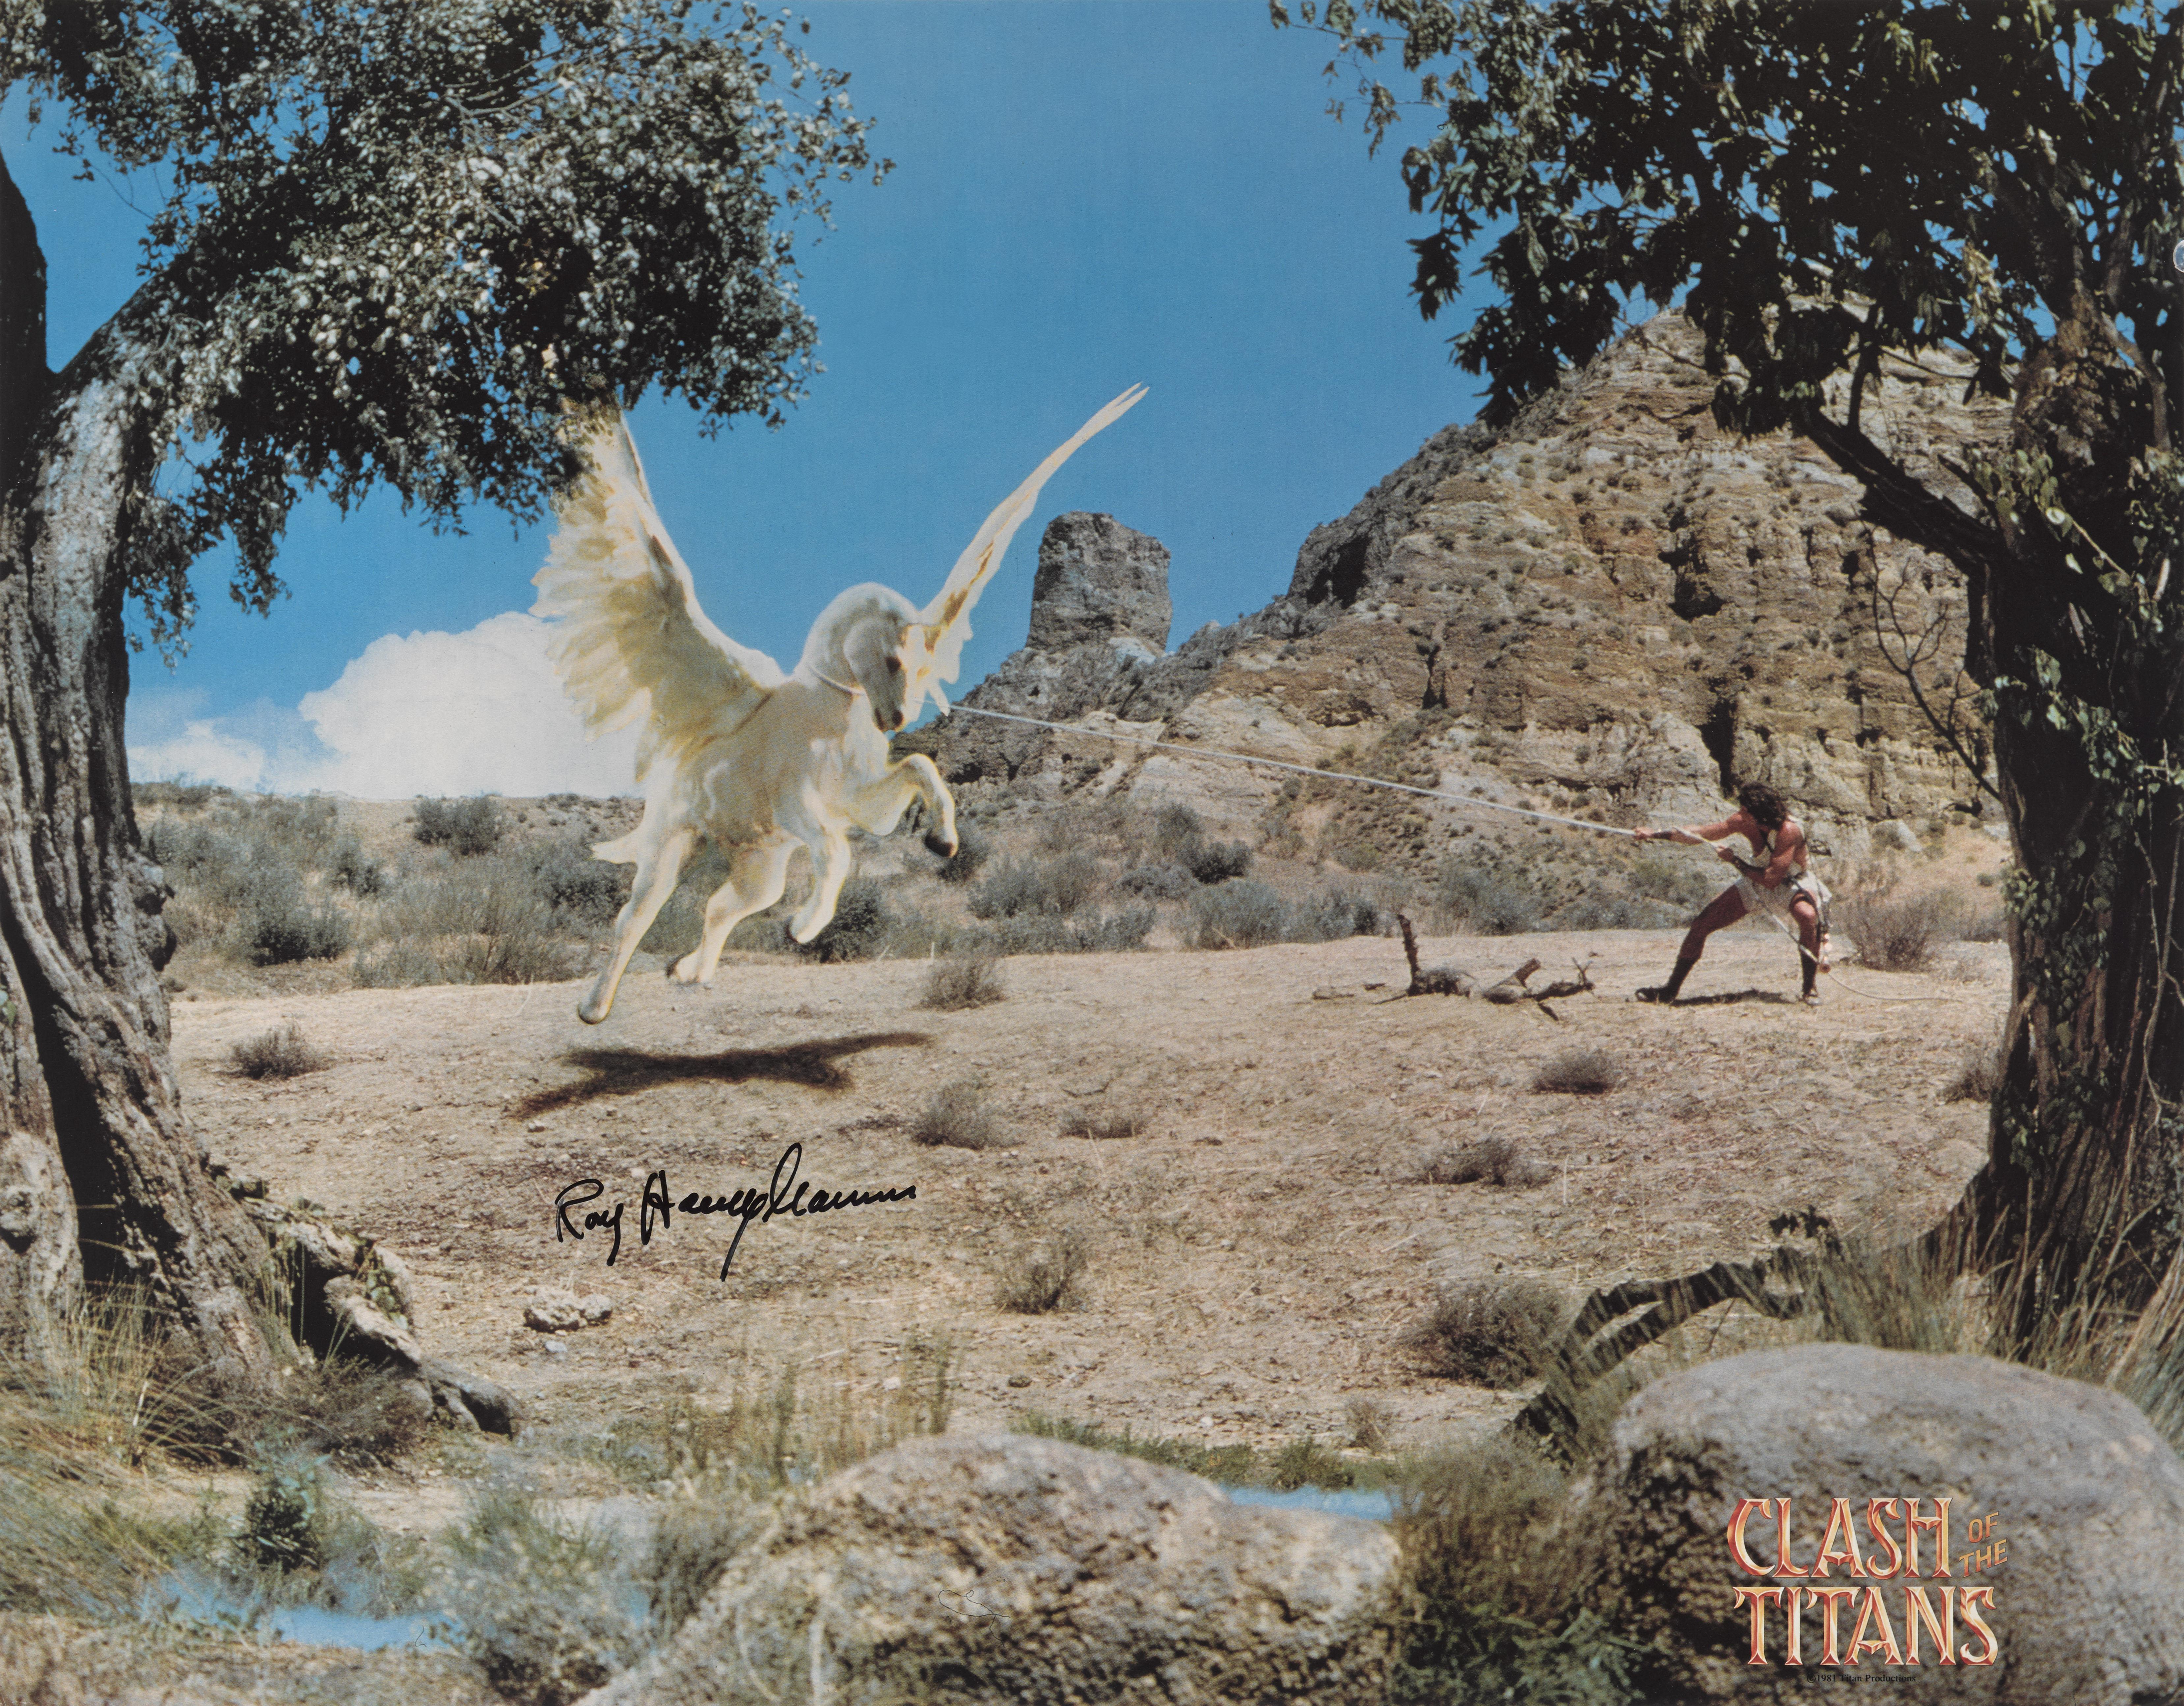 Original US oversized stills for Clash of the Titans, 1981.
This fantasy adventure film was directed by Desmond Davis and written by Beverley Cross. The film stars Harry Hamlin, Judi Bowker, Burgess Meredith, Maggie Smith and Laurence Olivier, and